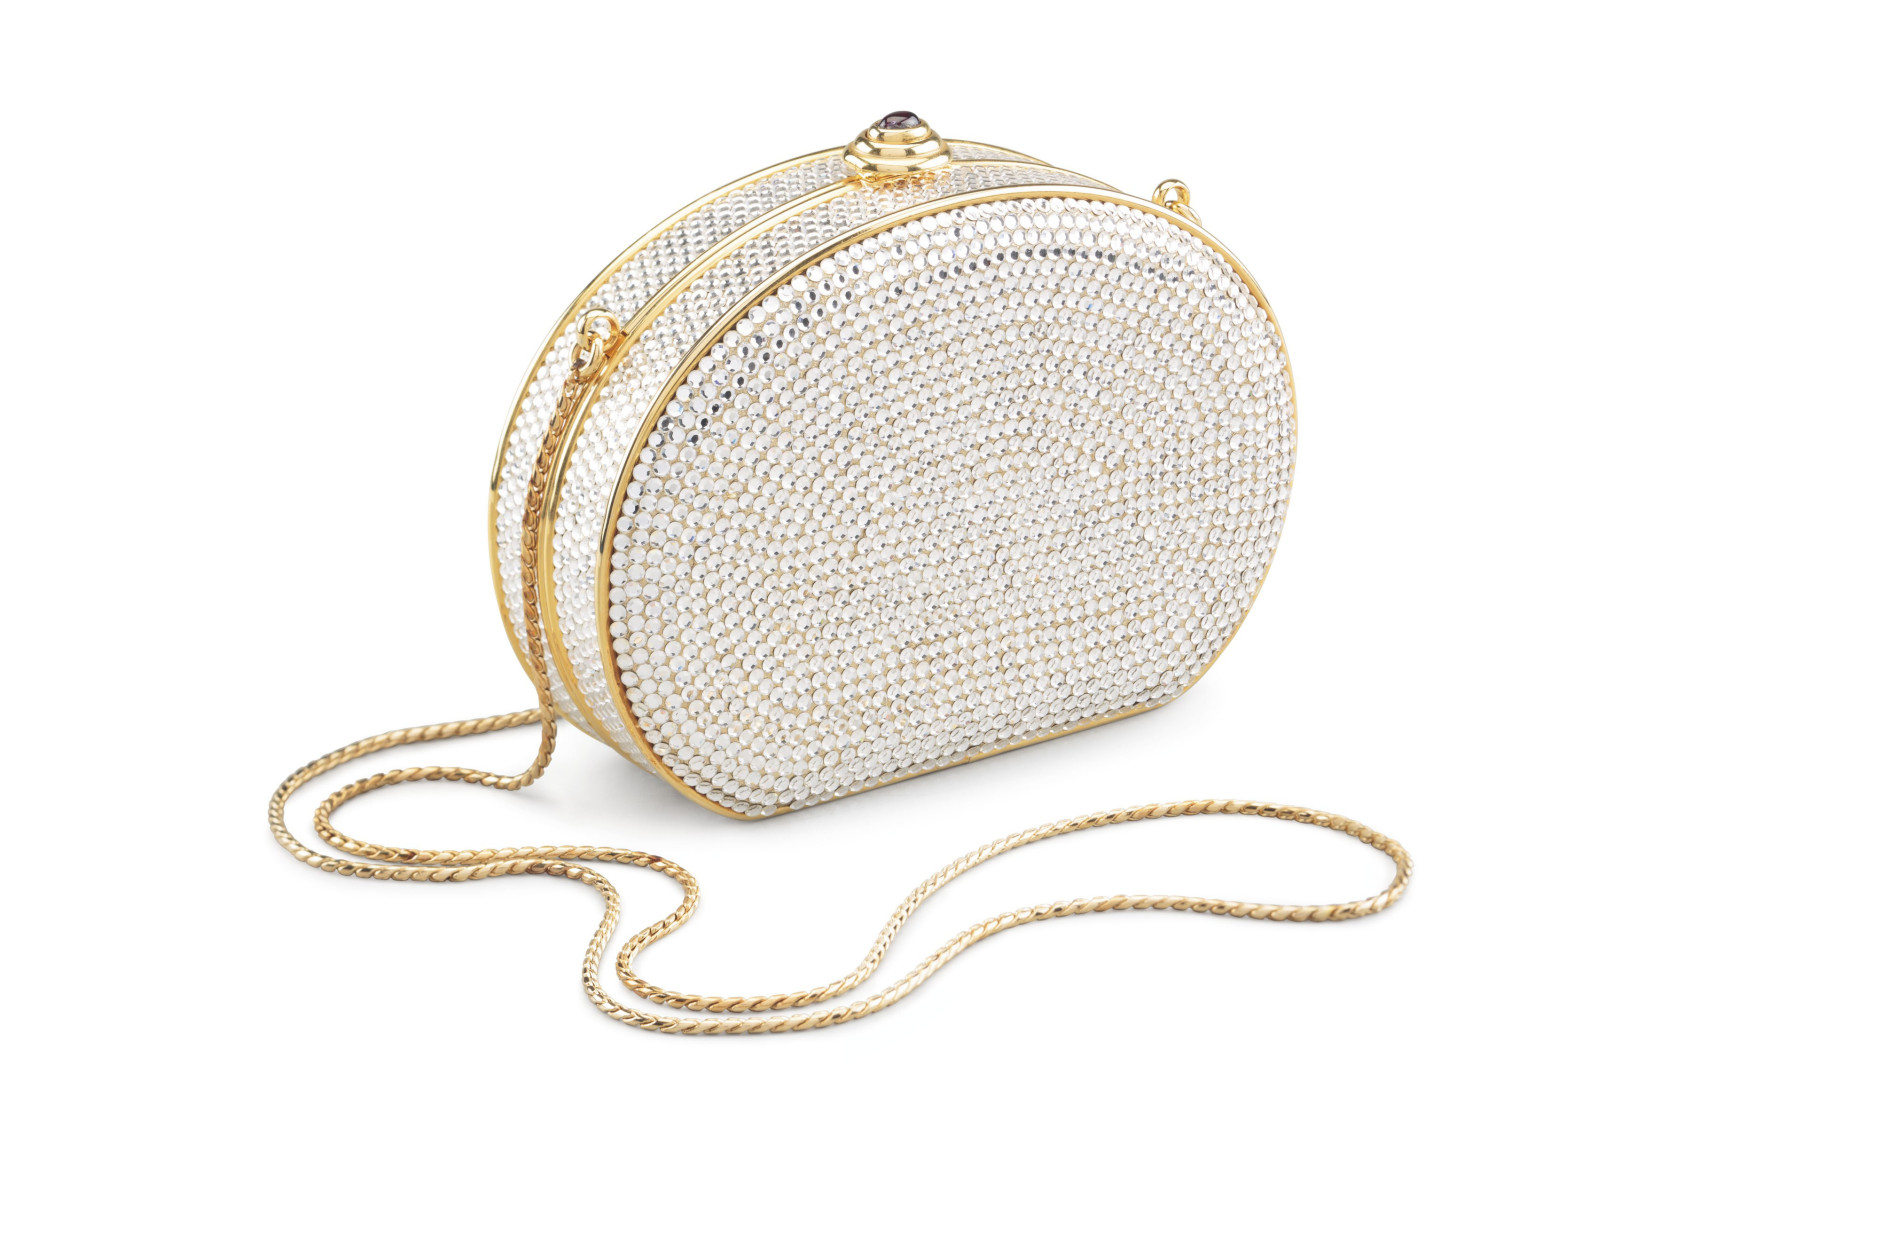 This Judith Leiber silver crystal clutch belonged to former first lady and is among her jewelry, belts and other accessories that will sell at auction this week. Christie's will auction more than 700 belongings of Ronald and Nancy Reagan that came from their Los Angeles ranch-style home, where they moved after leavign the White House in 1989. (Courtesy Christie's)